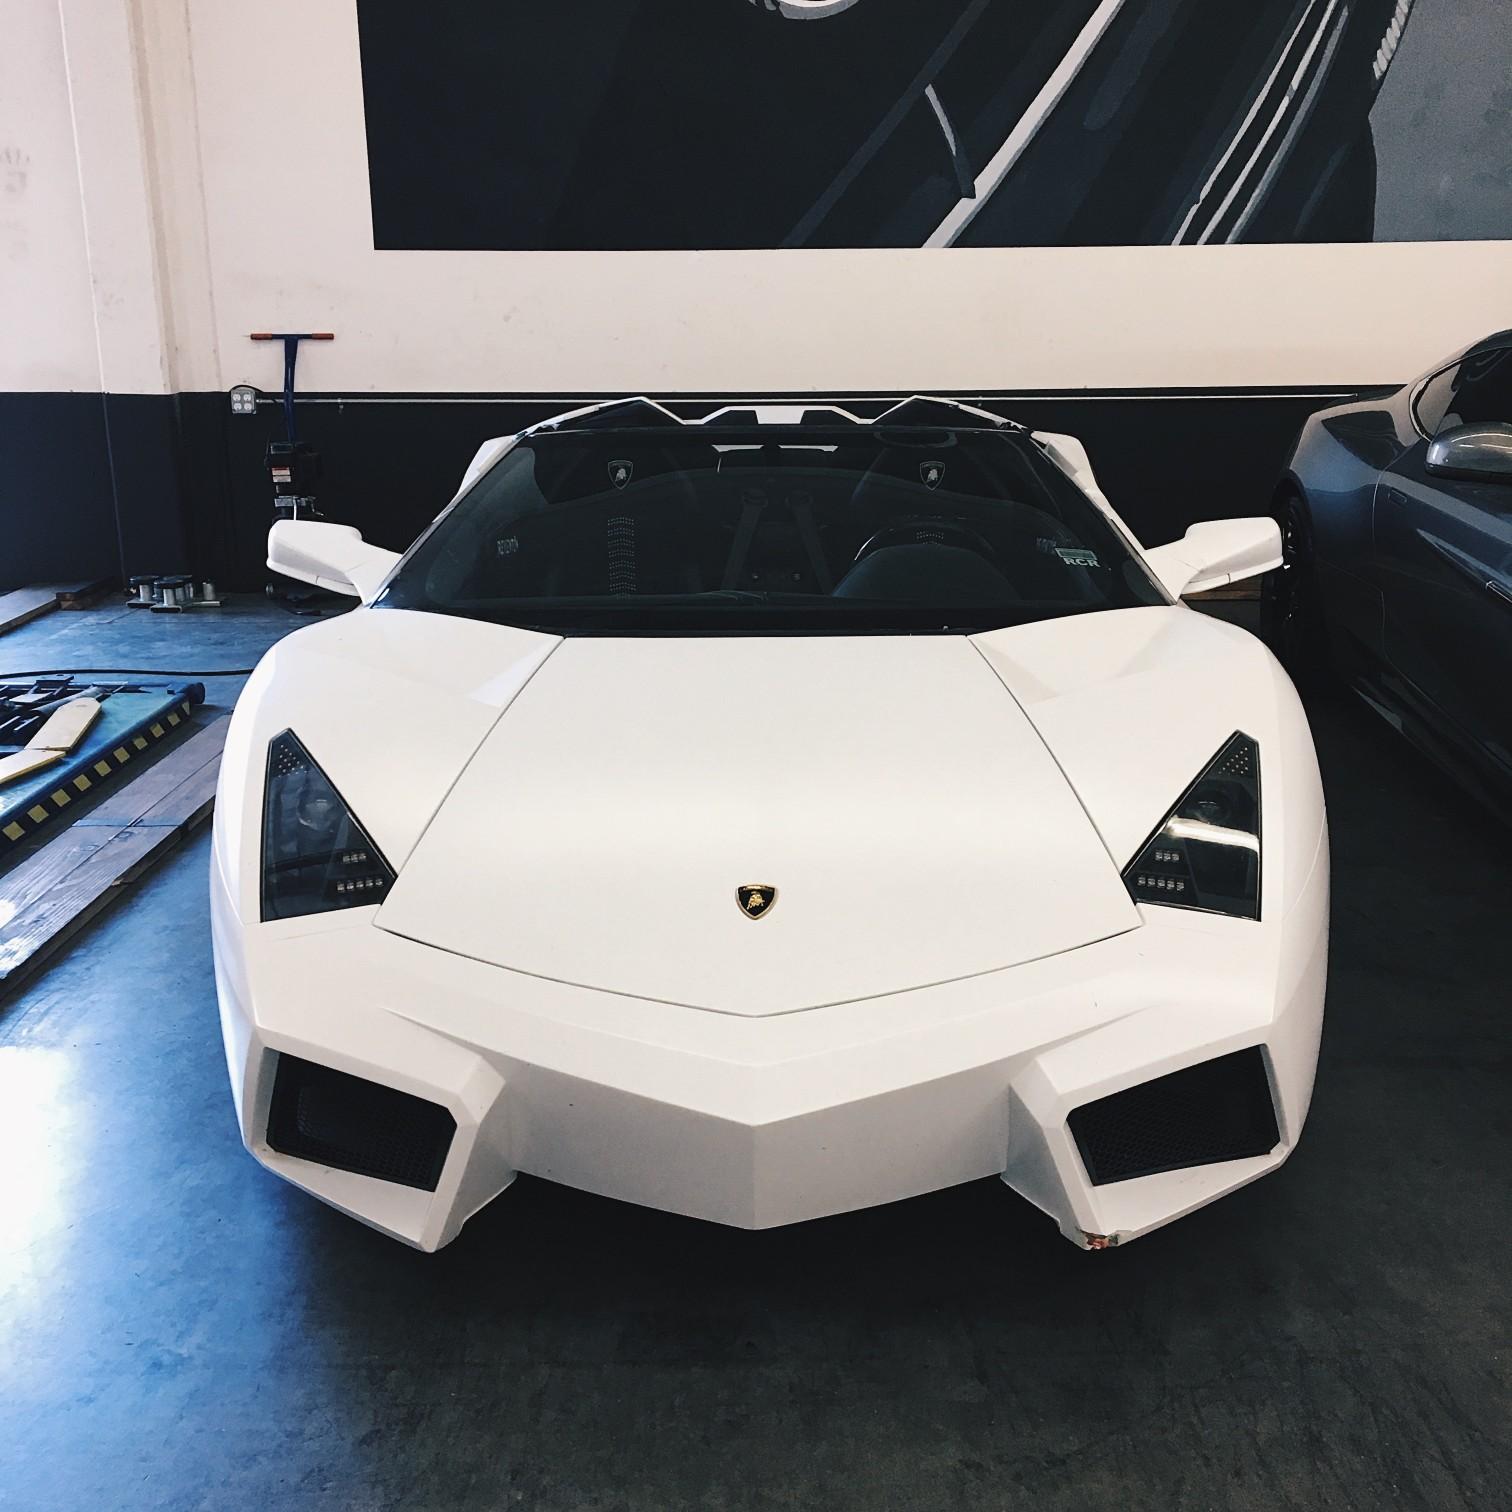 Since its inception, the Lamborghini Reventon has elicited different reactions from car fanatics and its consumers.